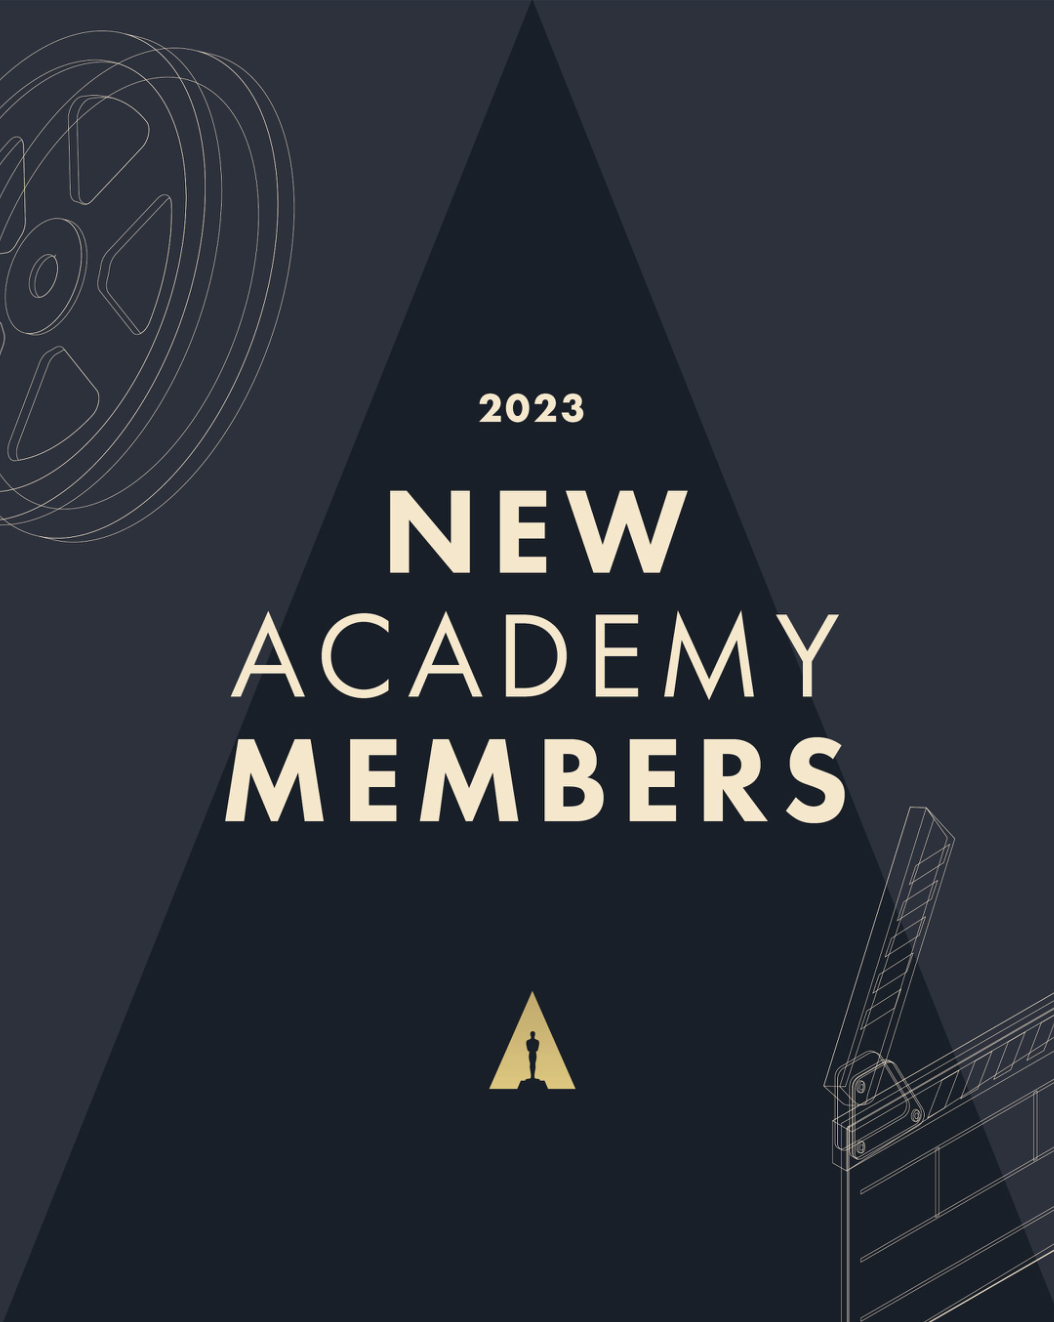 Oscars’ Class of 2023: RMD, Four Other Nigerians Are the Latest Members